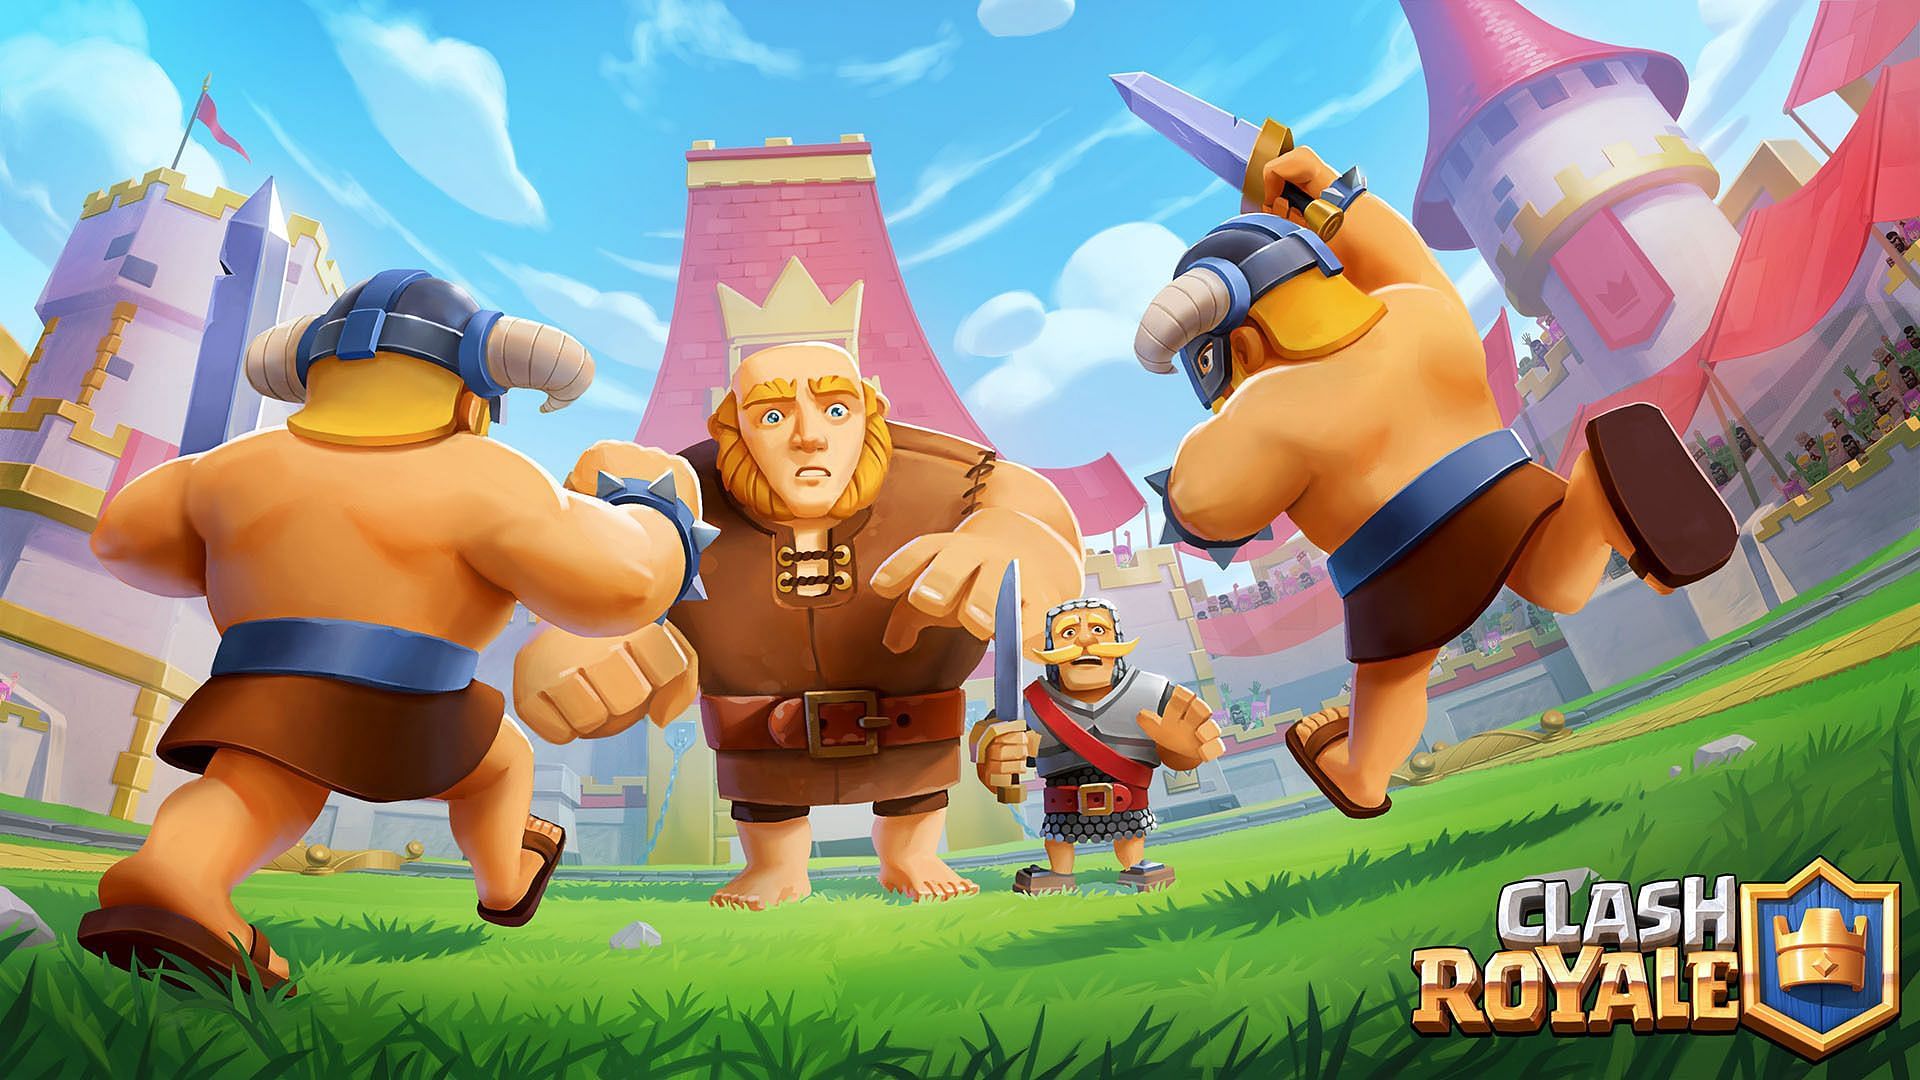 Elite Barbarians in the poster (Image via Supercell)